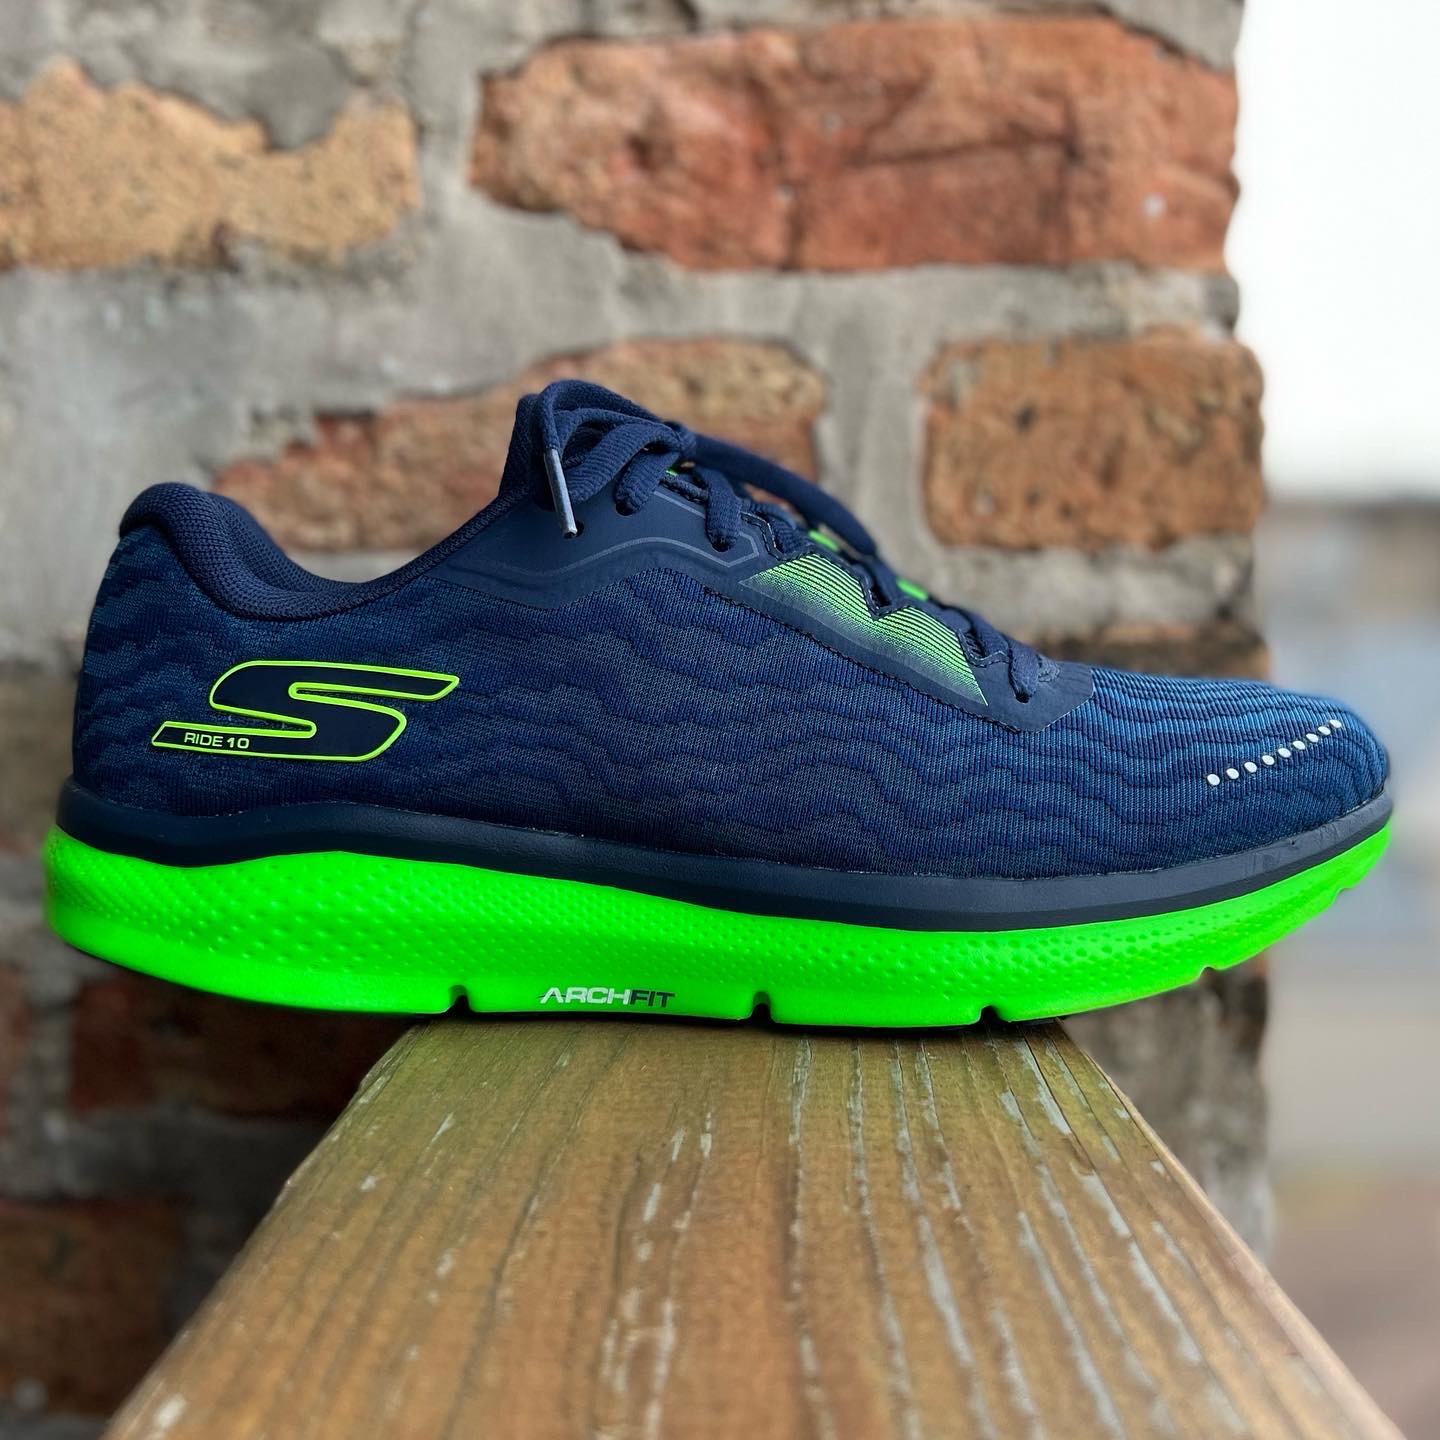 Road Trail Run: Skechers Performance GO Run Ride 10 Multi Tester Review at  50 Miles Plus: A Pleasant Light Everyday Trainer